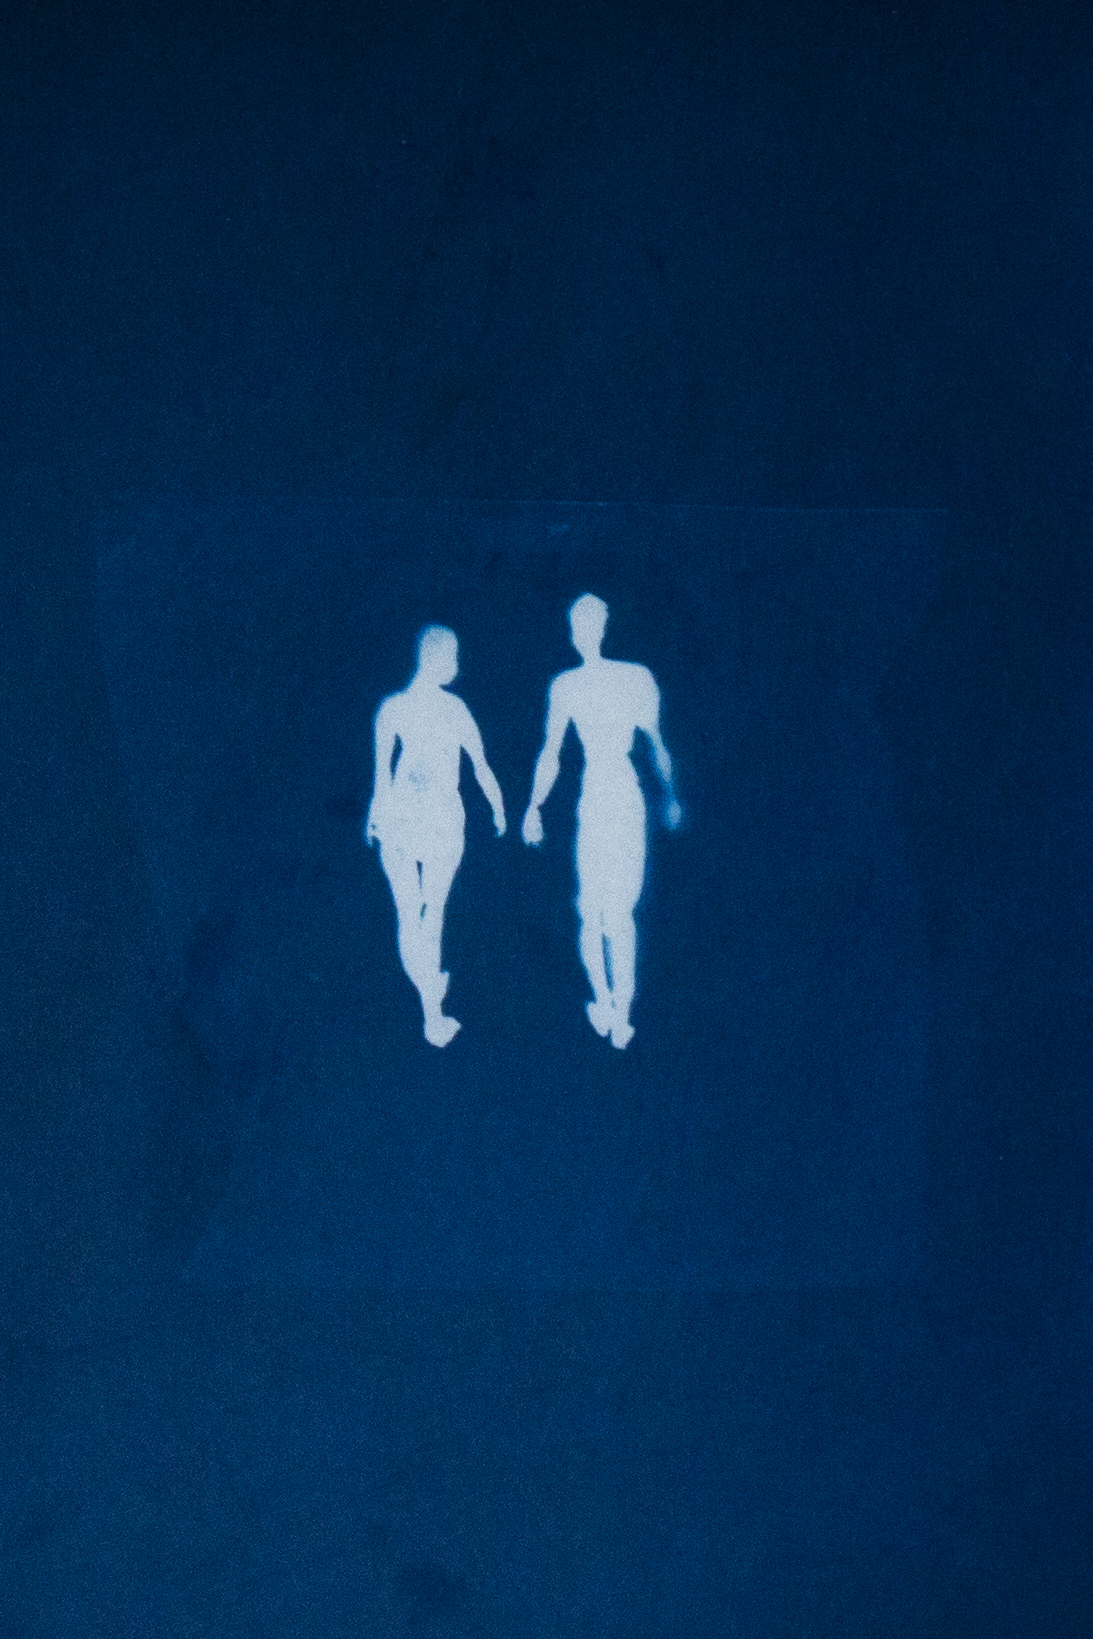  Han Qin,  Lovers-1 , 2018. Cyanotype on paper, 10 x 6 1/2 inch ©Han Qin, courtesy Fou Gallery 